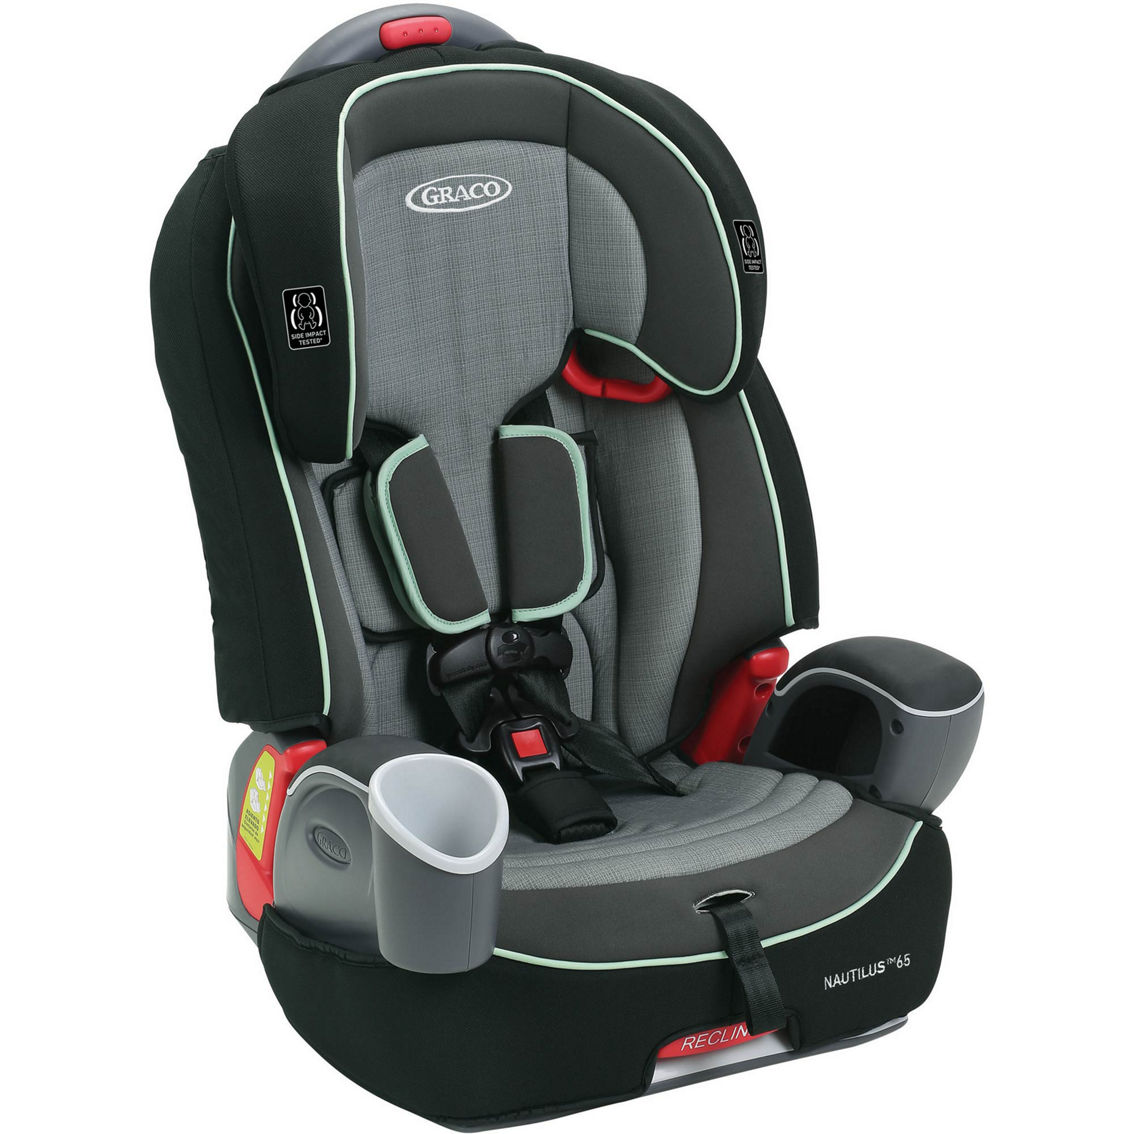 graco turbobooster seat manual